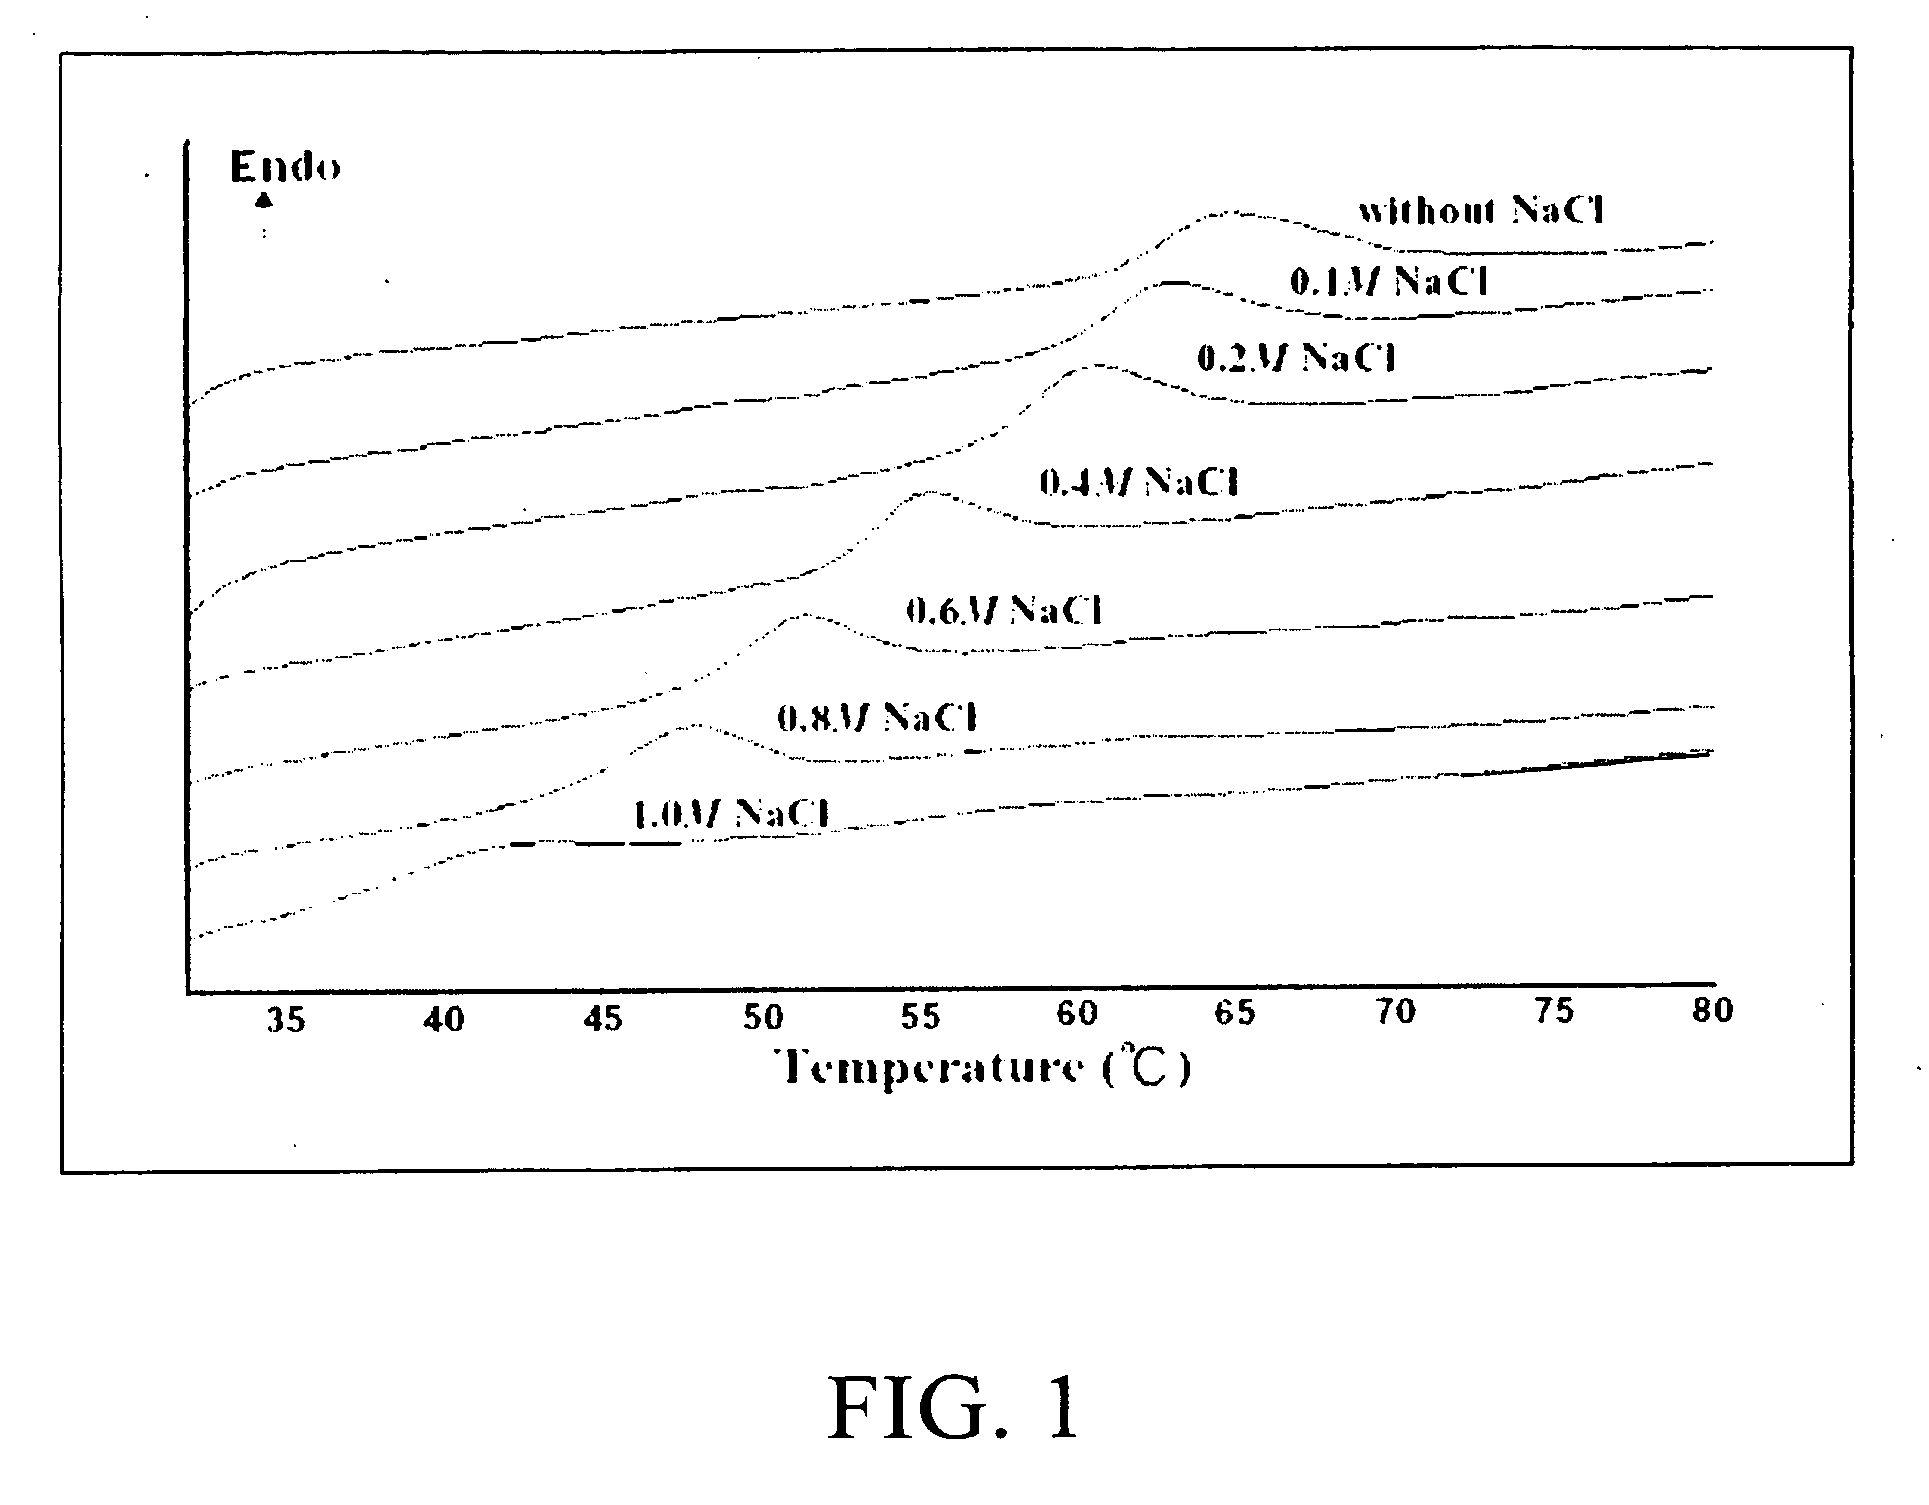 Medical device and methods for living cell injection